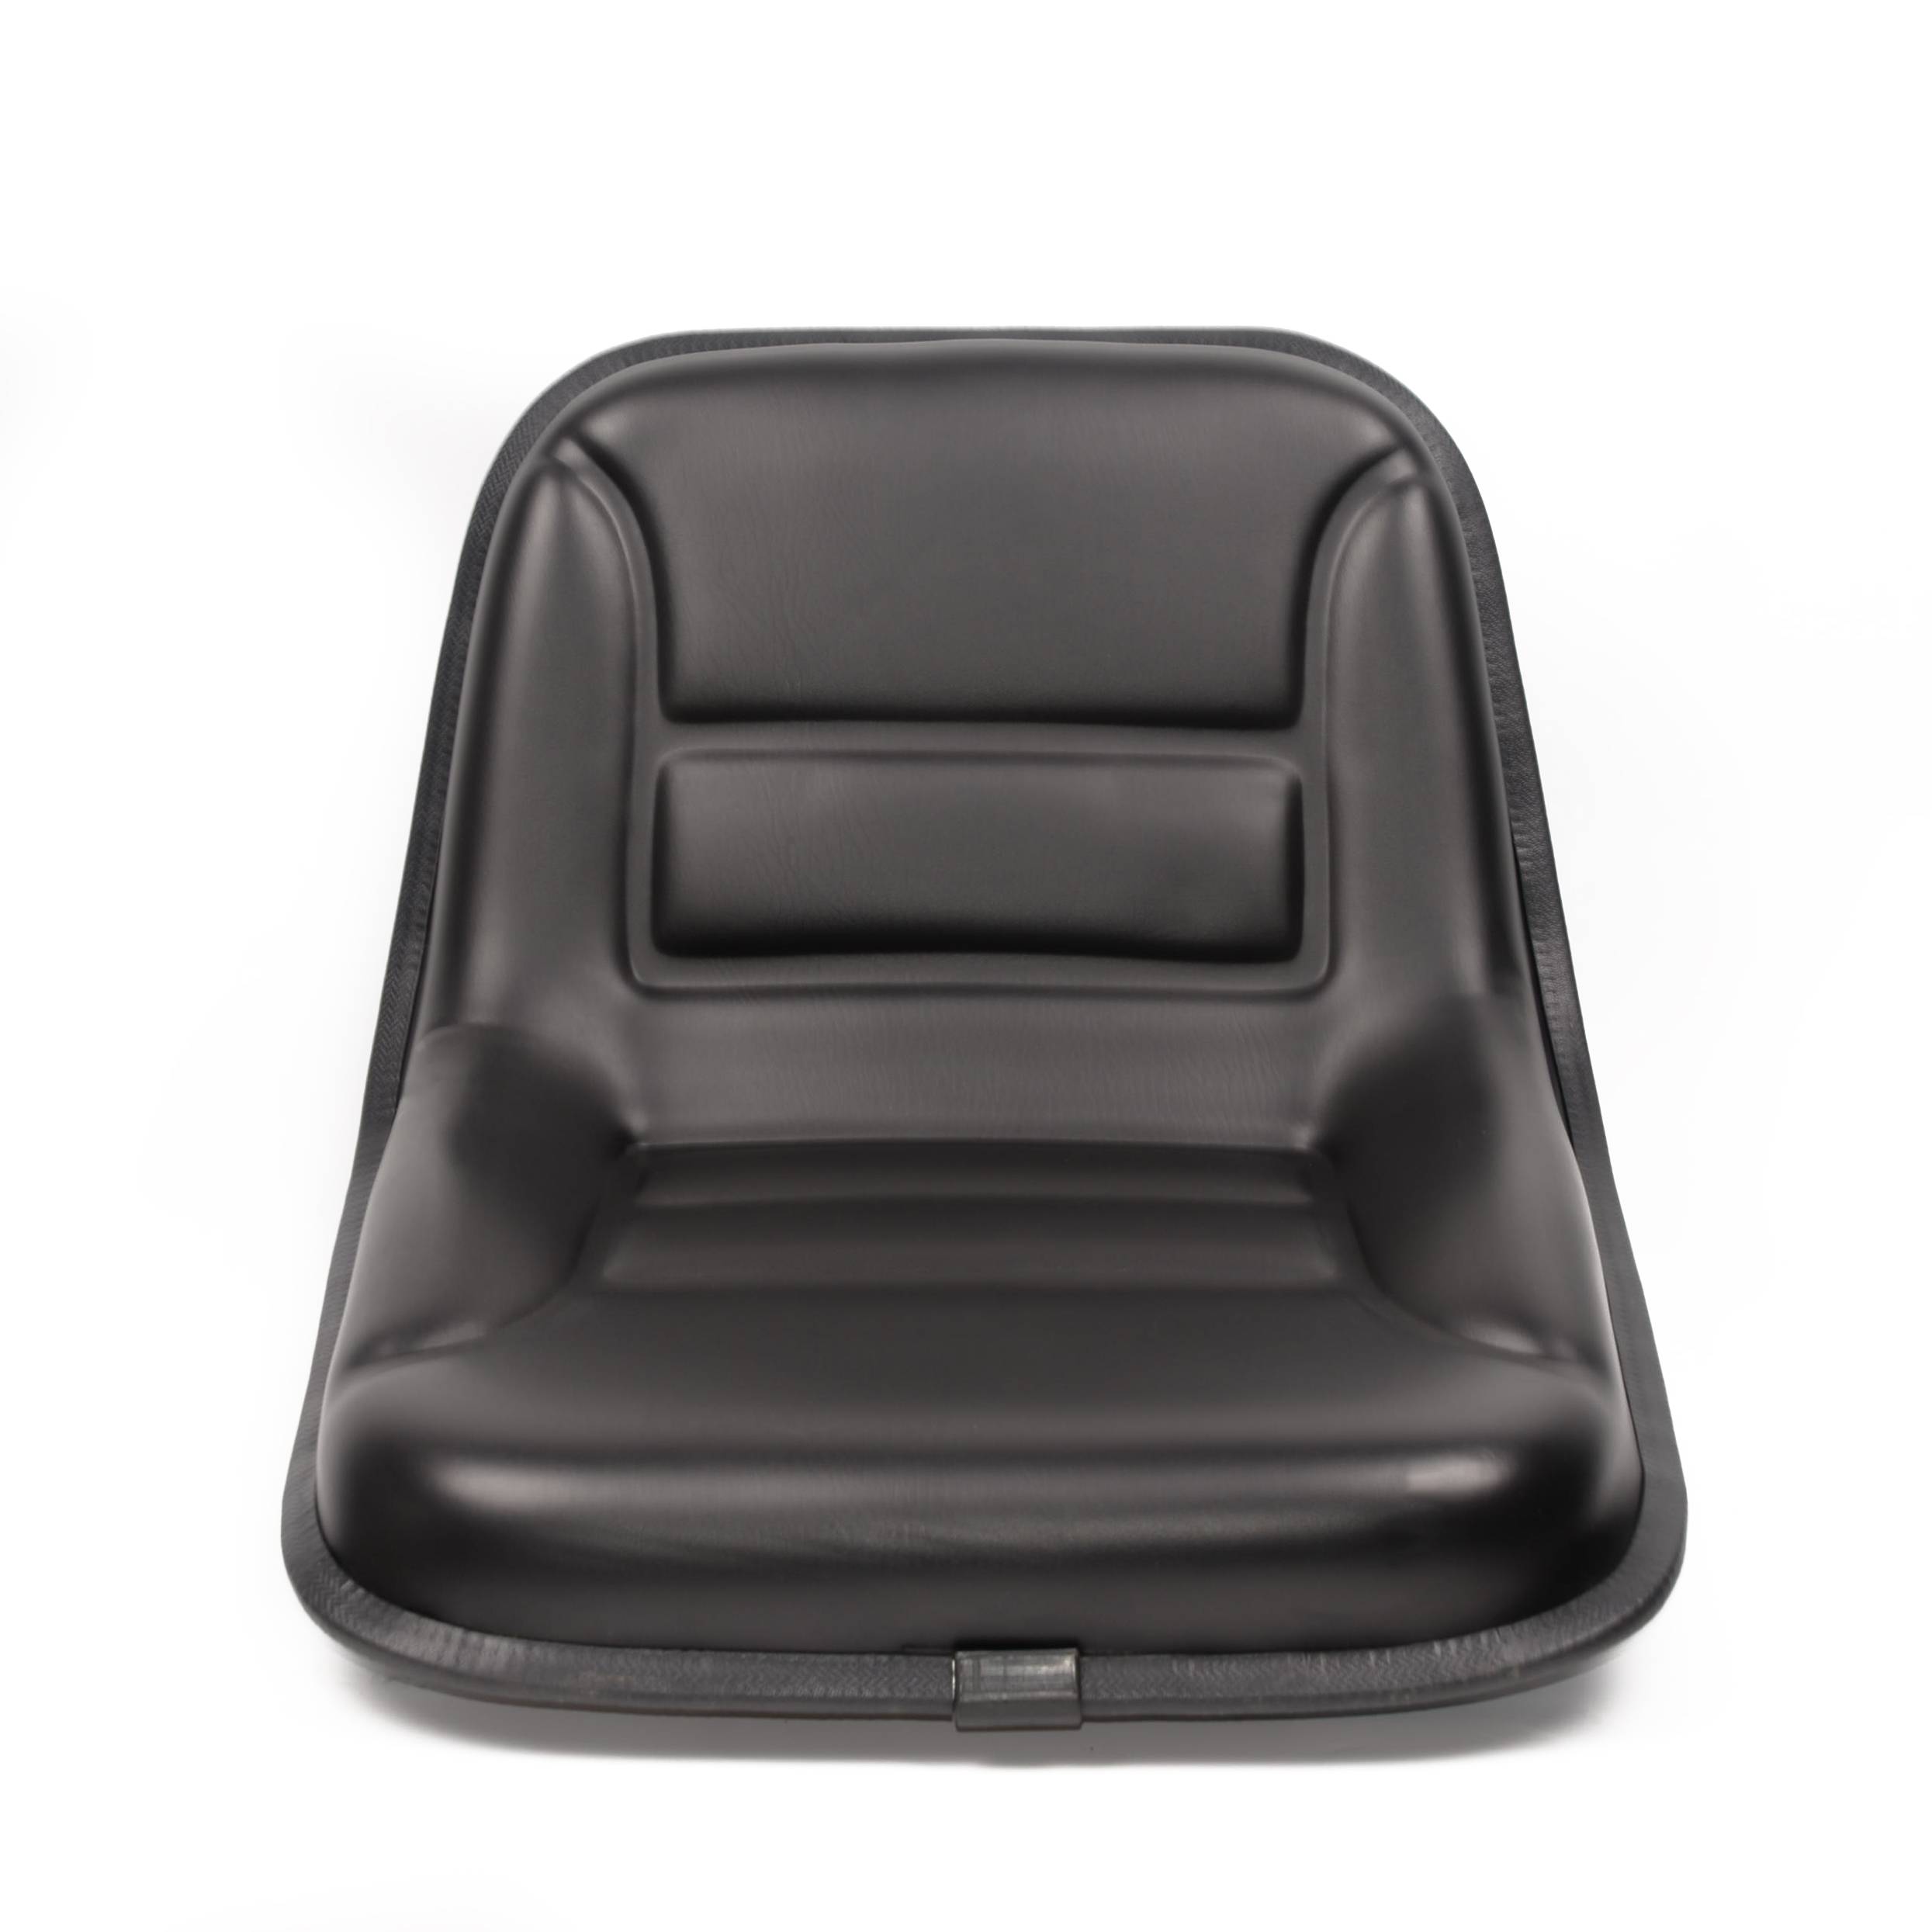 China New Product Suspension Boat Seat Pedestal - YY29 Universal farm tractor seat – Qinglin Seat